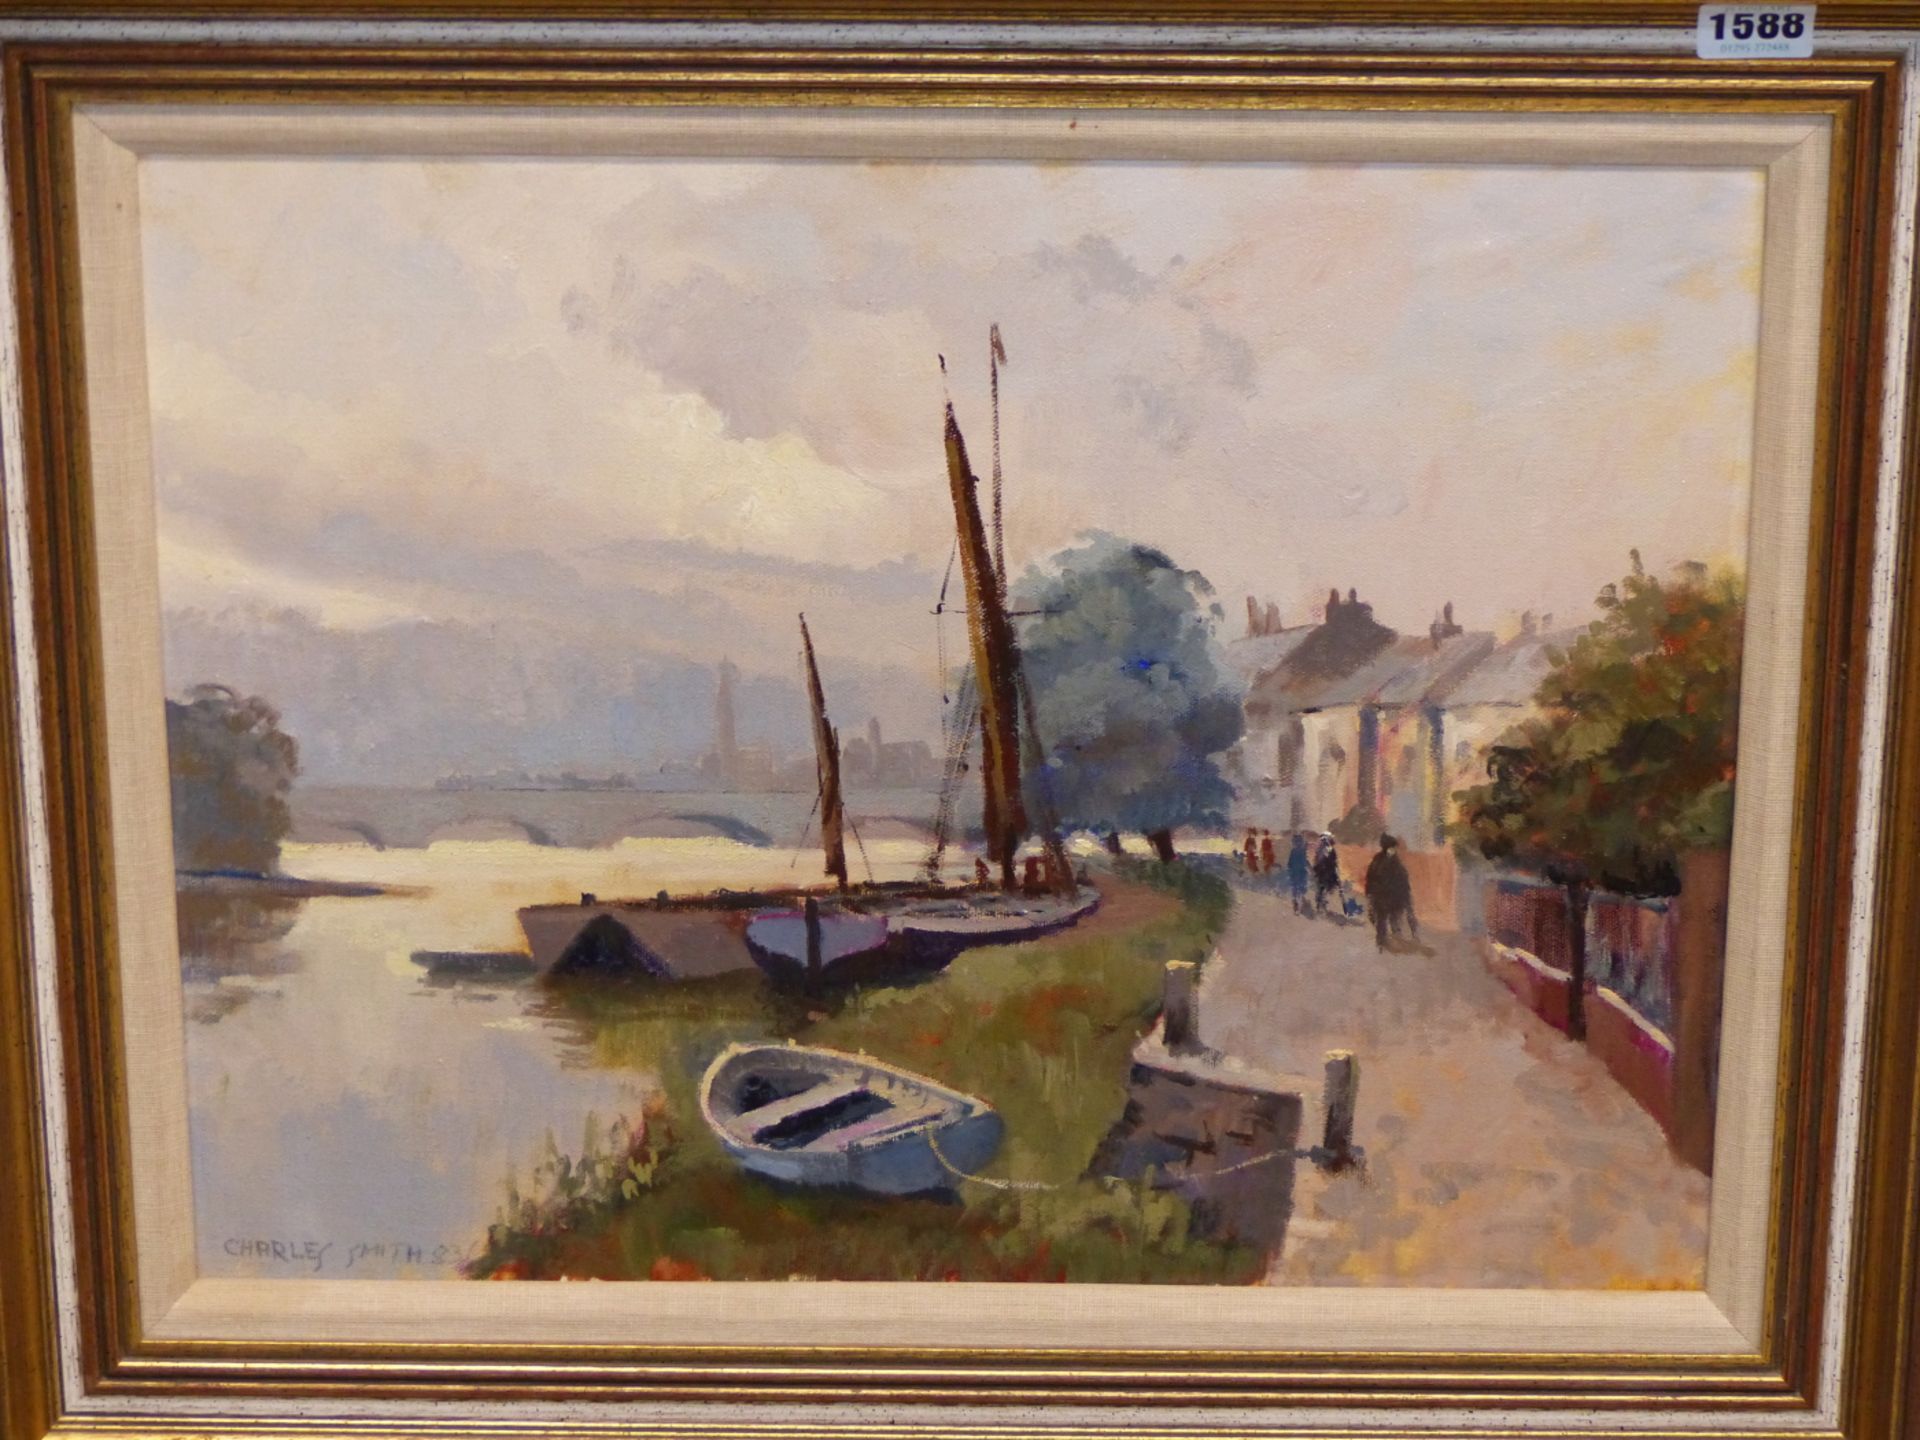 CHARLES SMITH. FRSA. ( 1913-2003) ARR. STRAND ON THE GREEN. BOATS AT RIVERSIDE DOCK. SIGNED L/L - Image 2 of 7